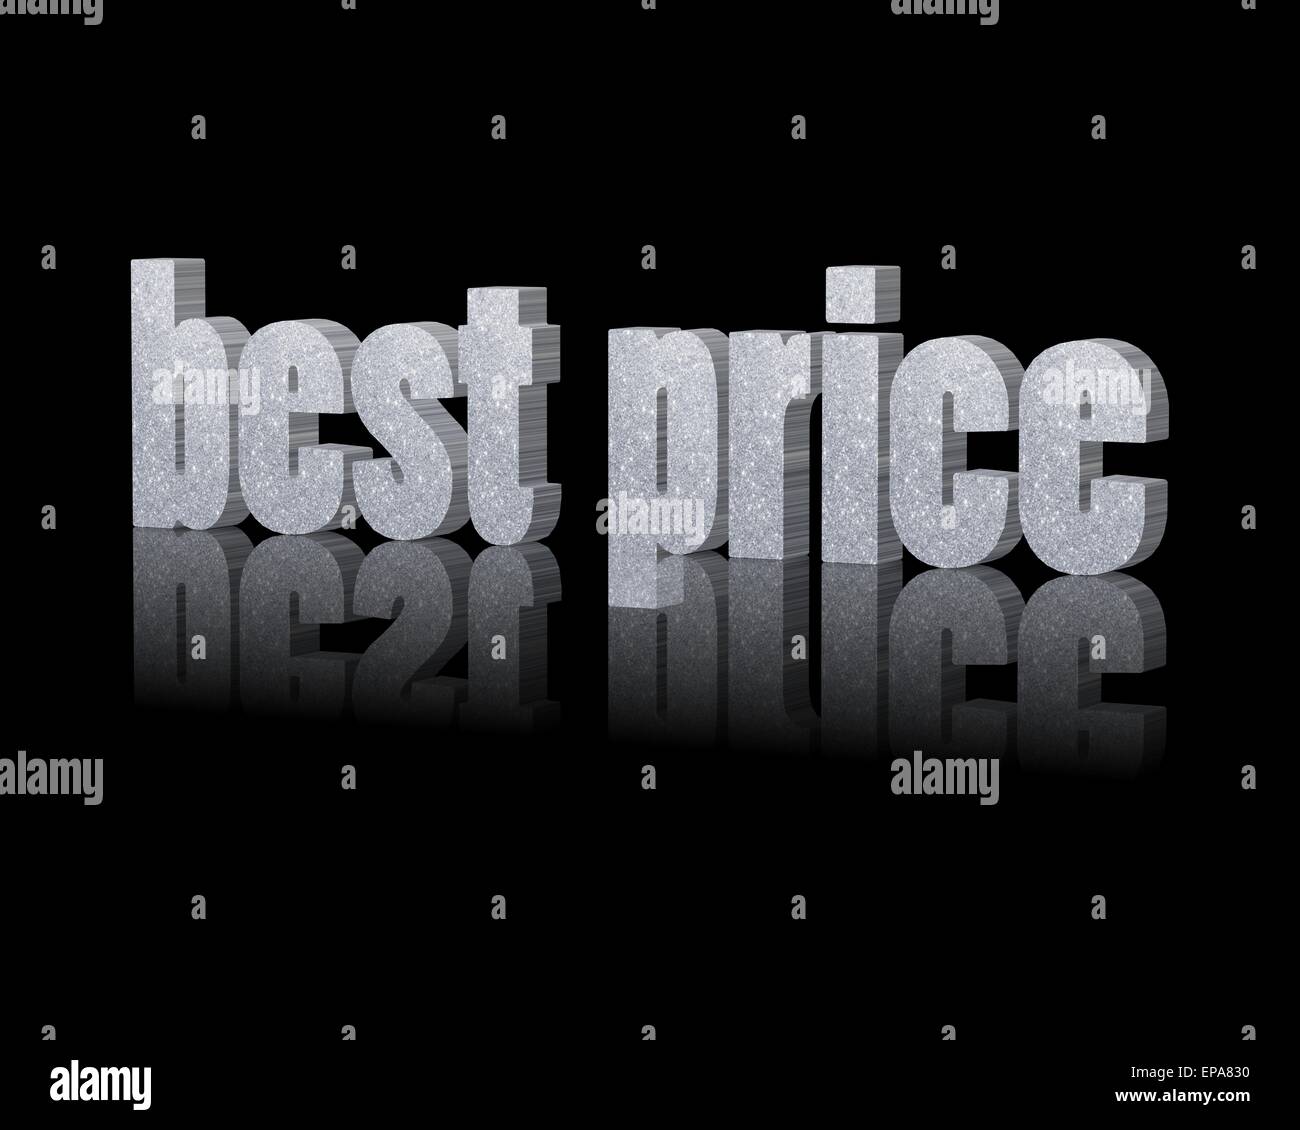 sale and best price Stock Photo